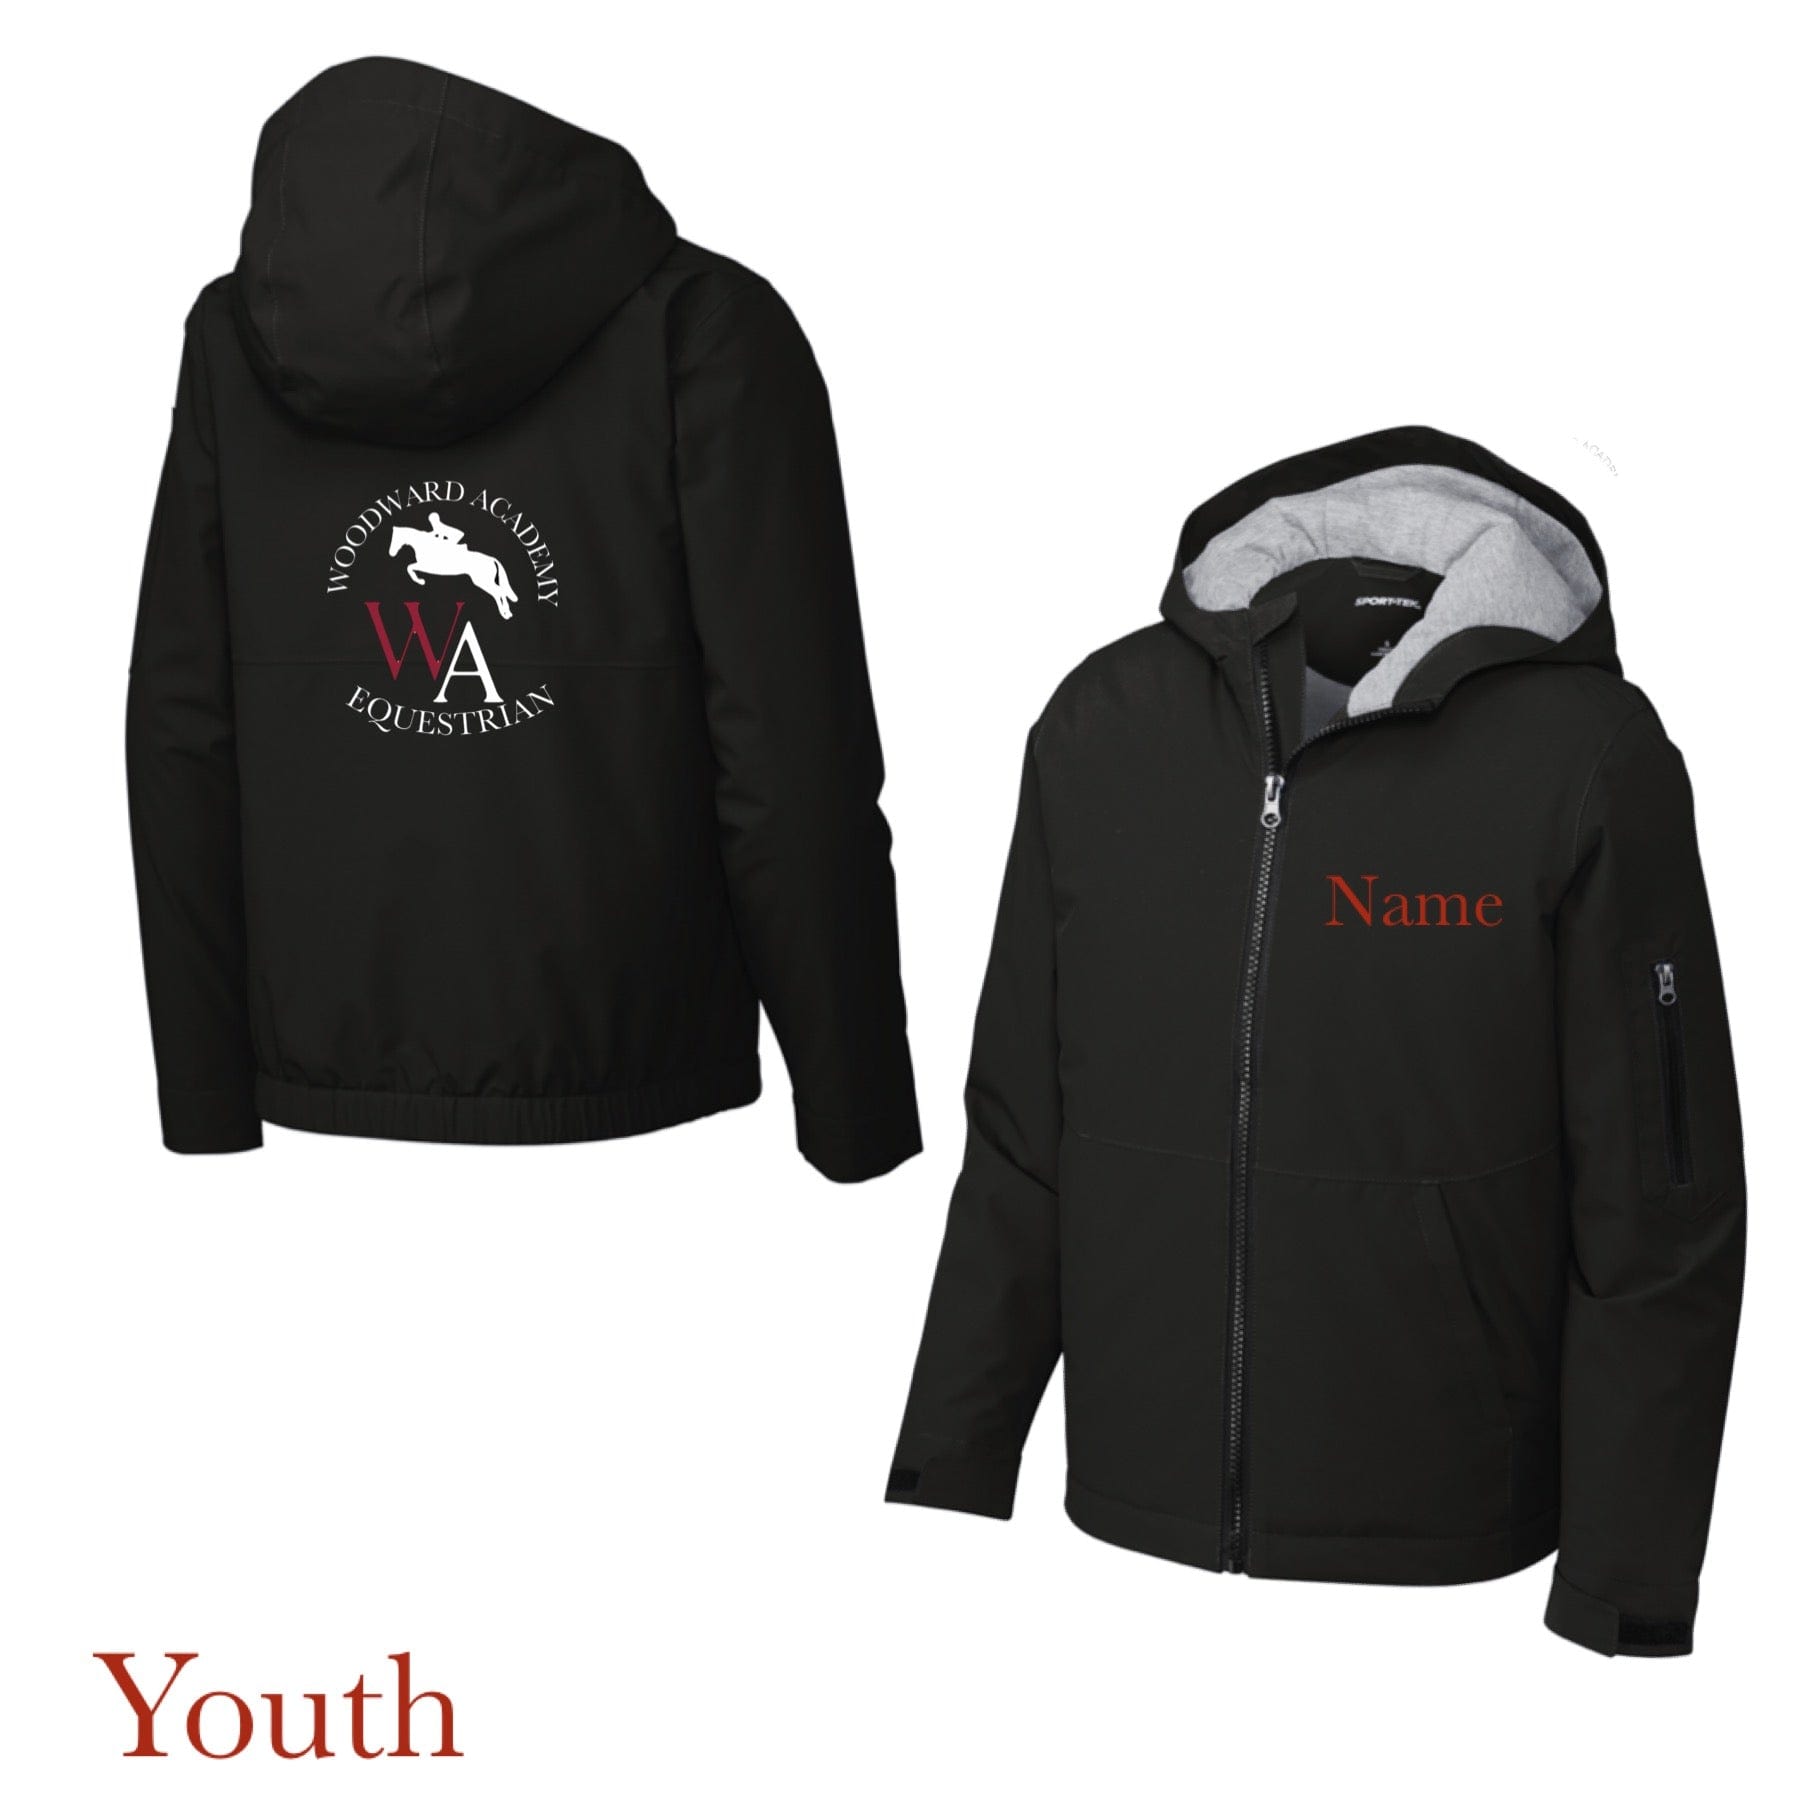 Equestrian Team Apparel Woodward Academy Youth Jacket equestrian team apparel online tack store mobile tack store custom farm apparel custom show stable clothing equestrian lifestyle horse show clothing riding clothes horses equestrian tack store